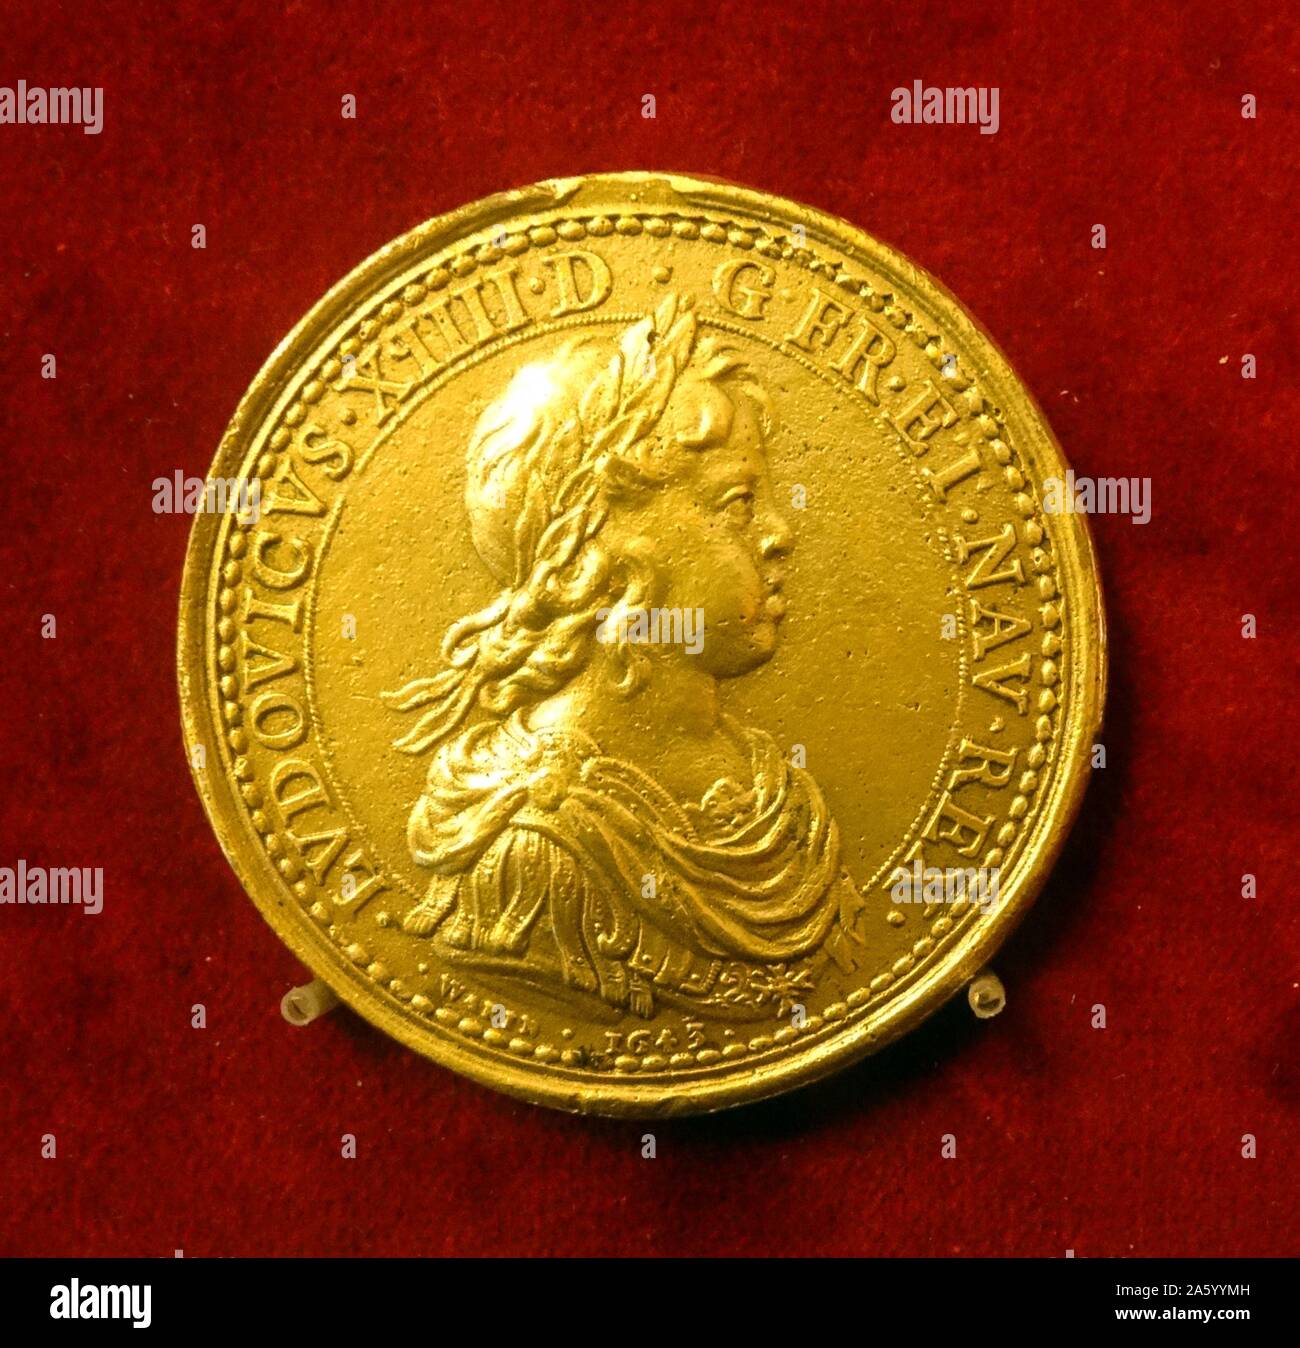 Gilt bronze coin depicting Louis XIII of France by Guillaume Dupré (1576-1643) French sculptor and medalist. Dated 17th Century Stock Photo